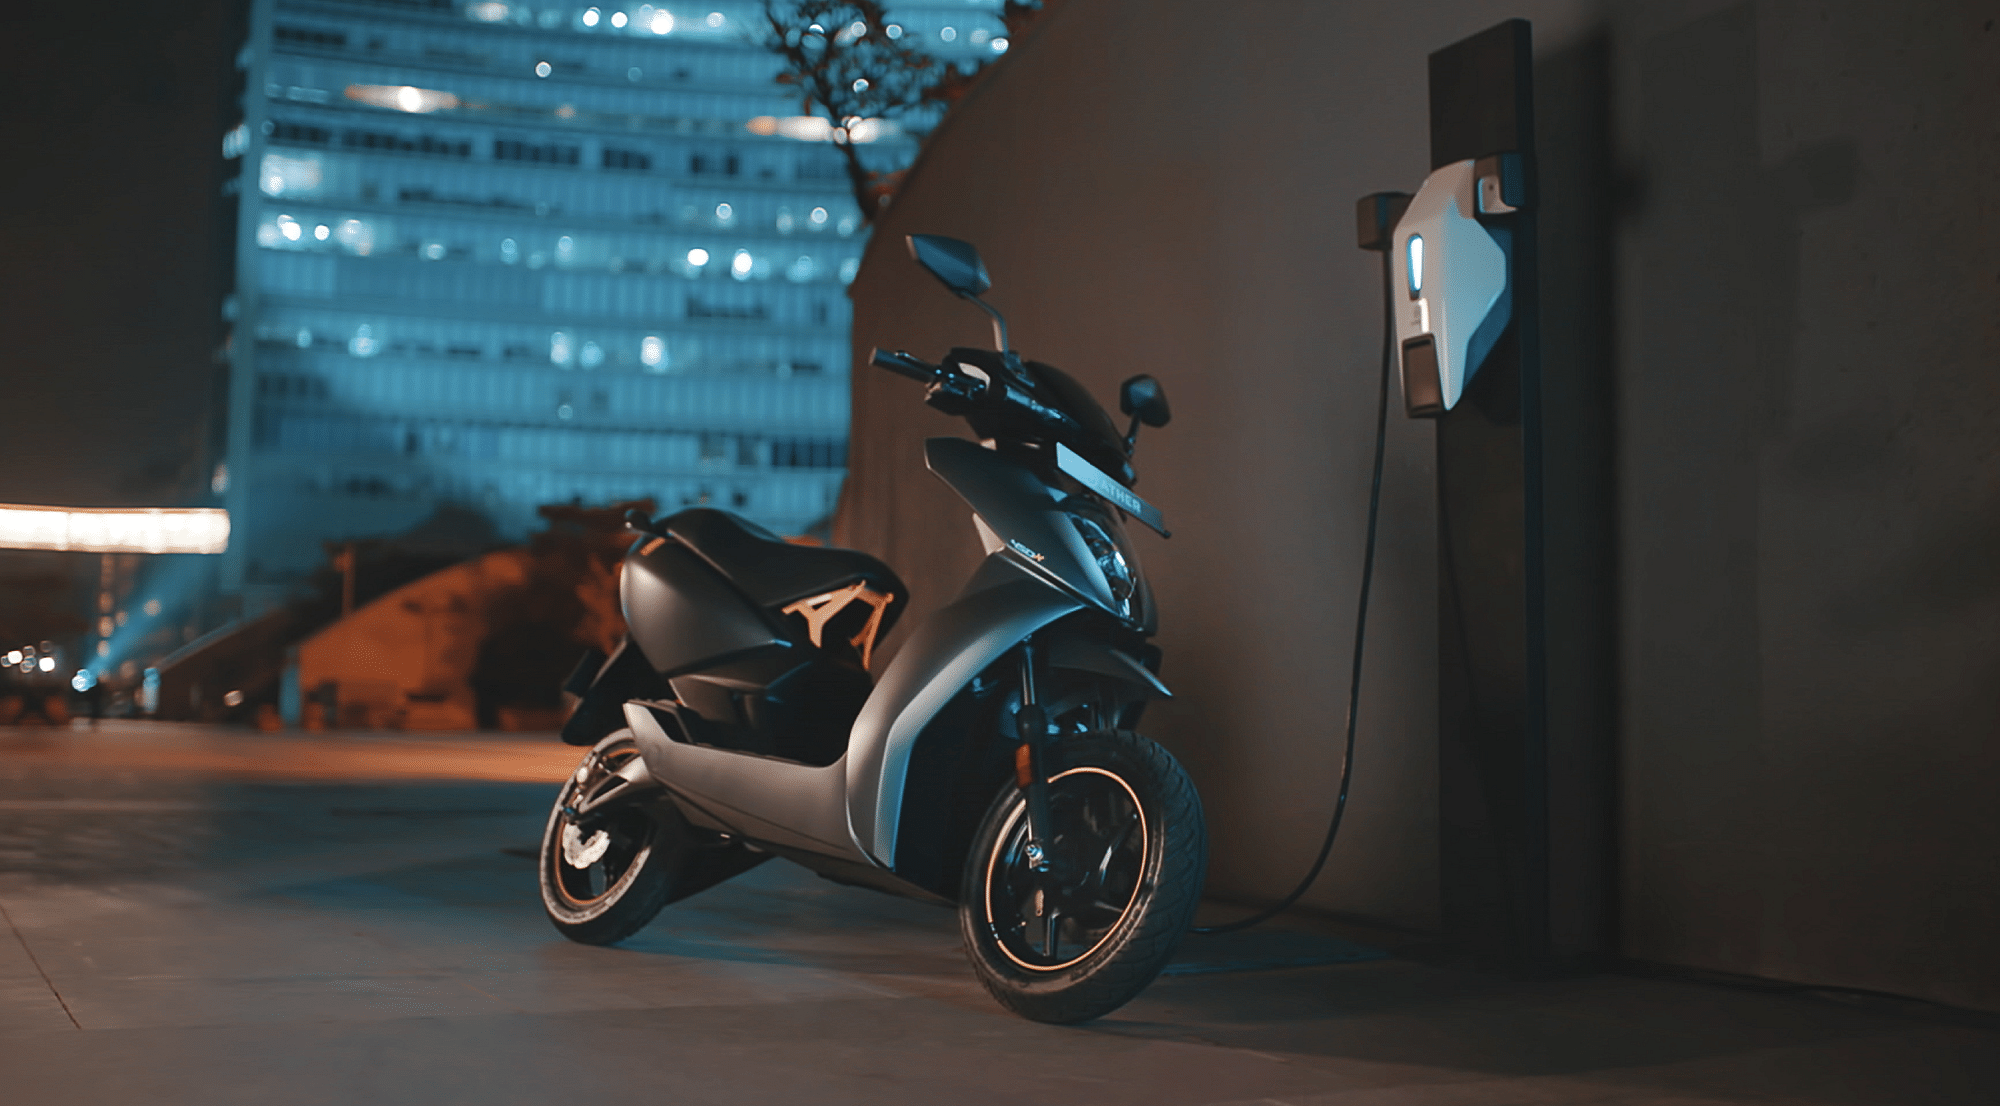 Ather 450x Launched in India Price, Specifications, Details, Images